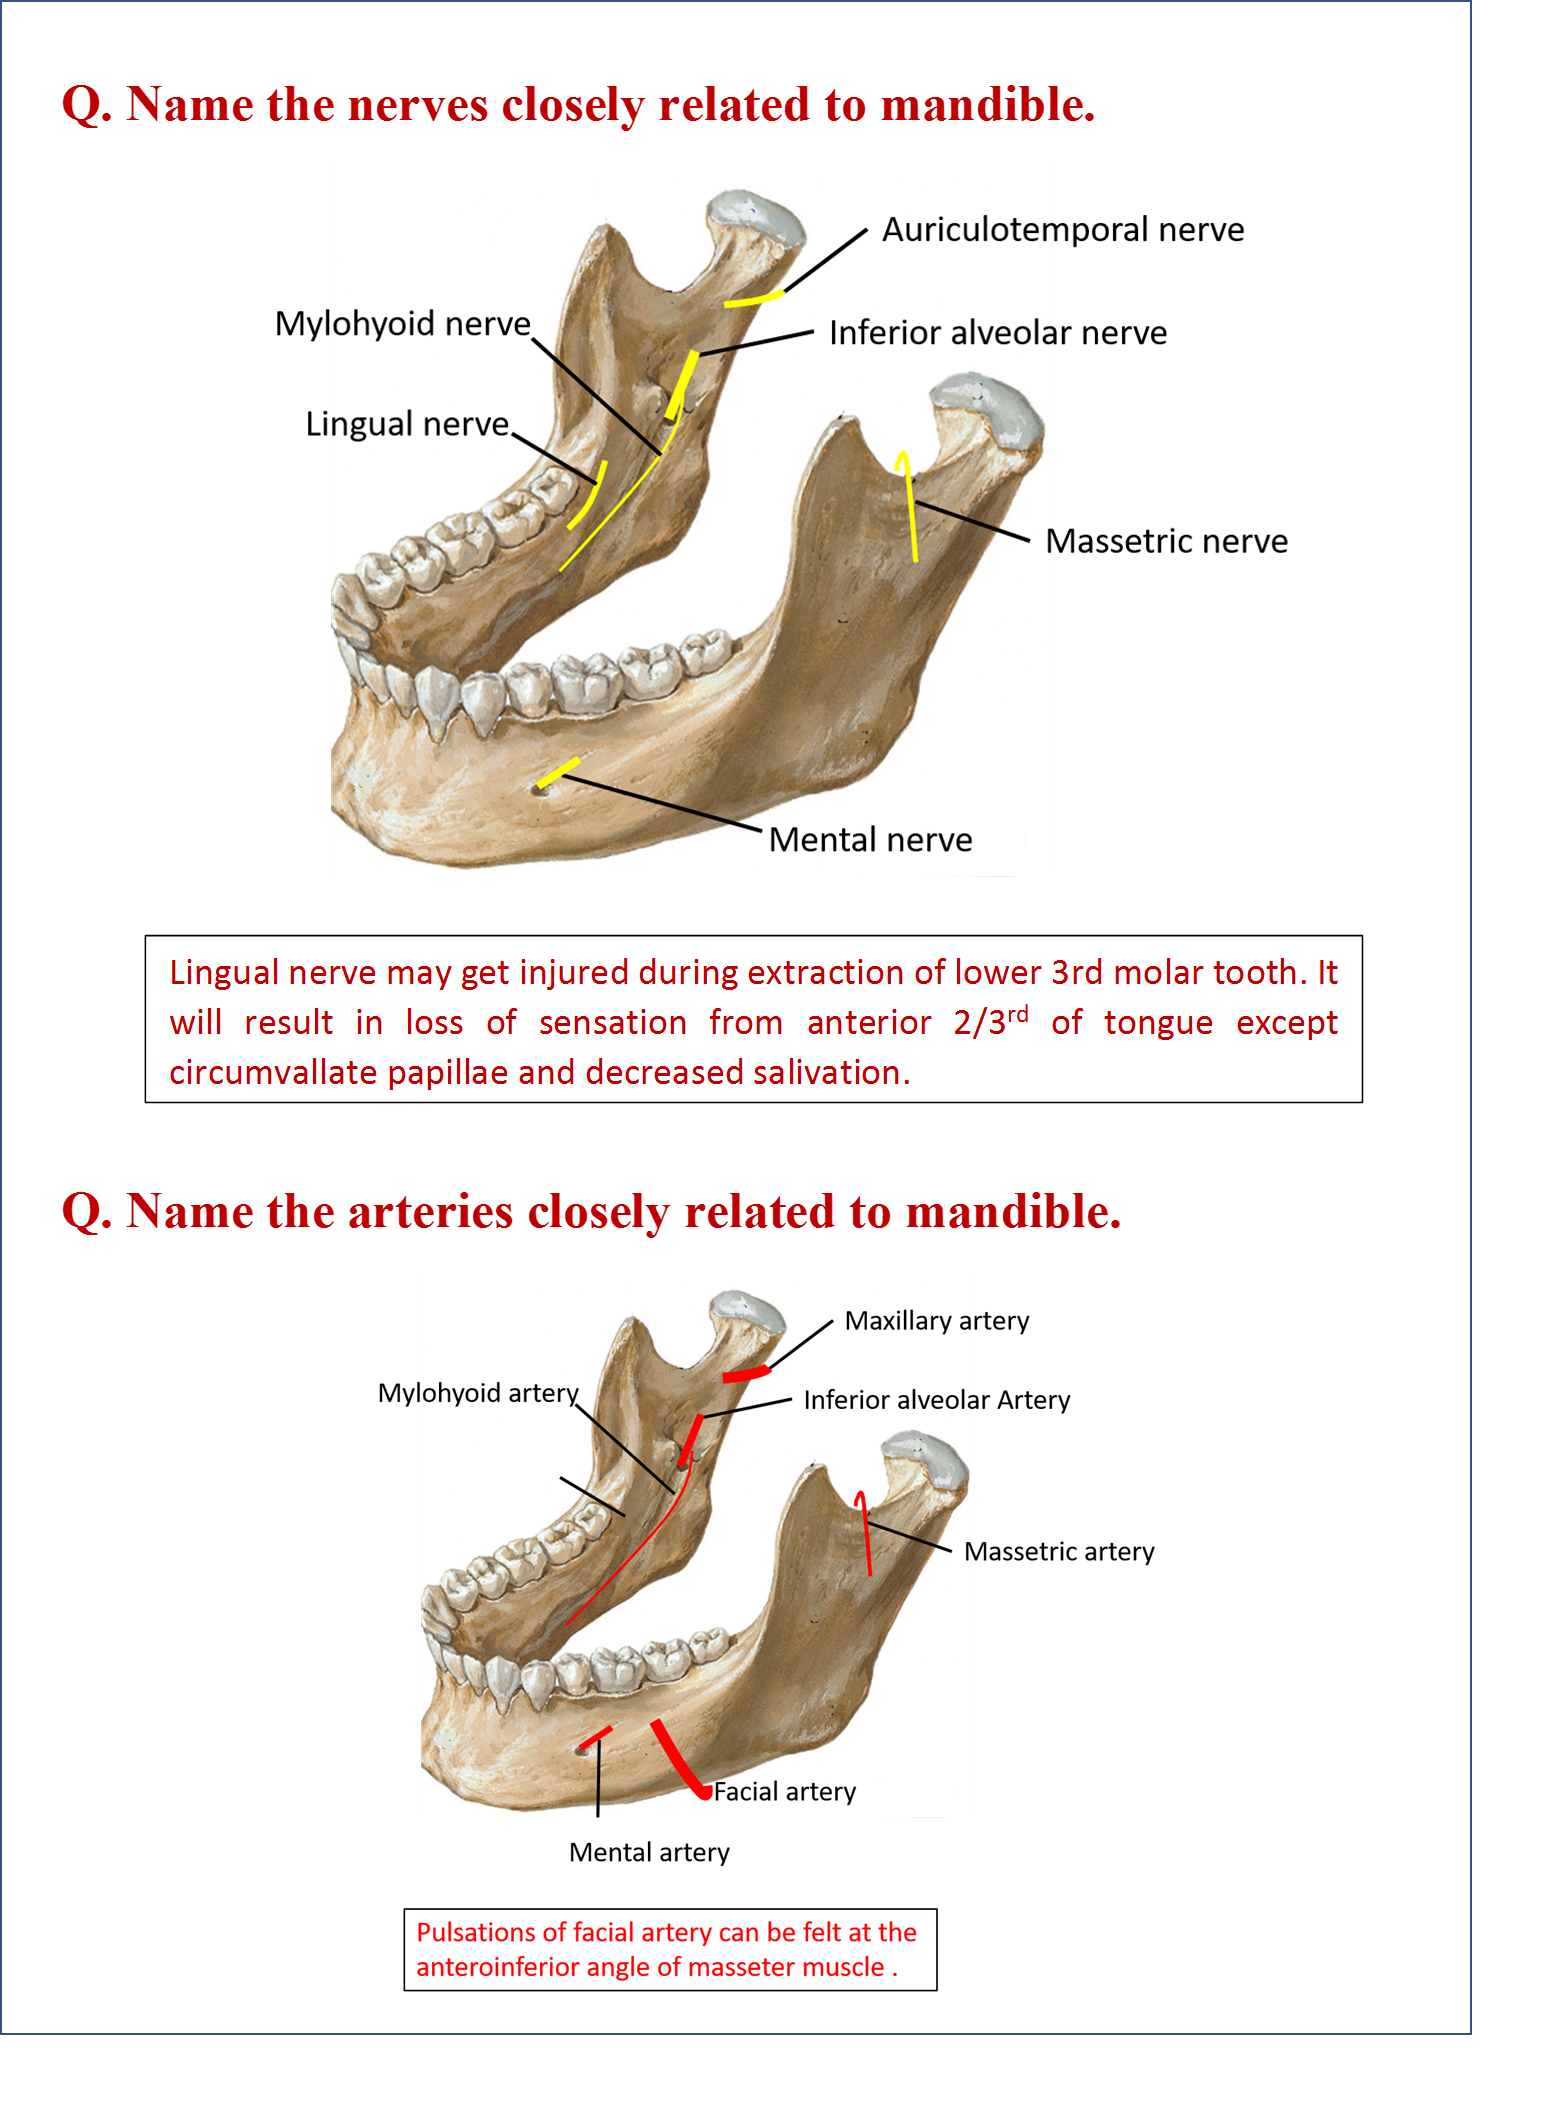 nerves and arteries related to mandible